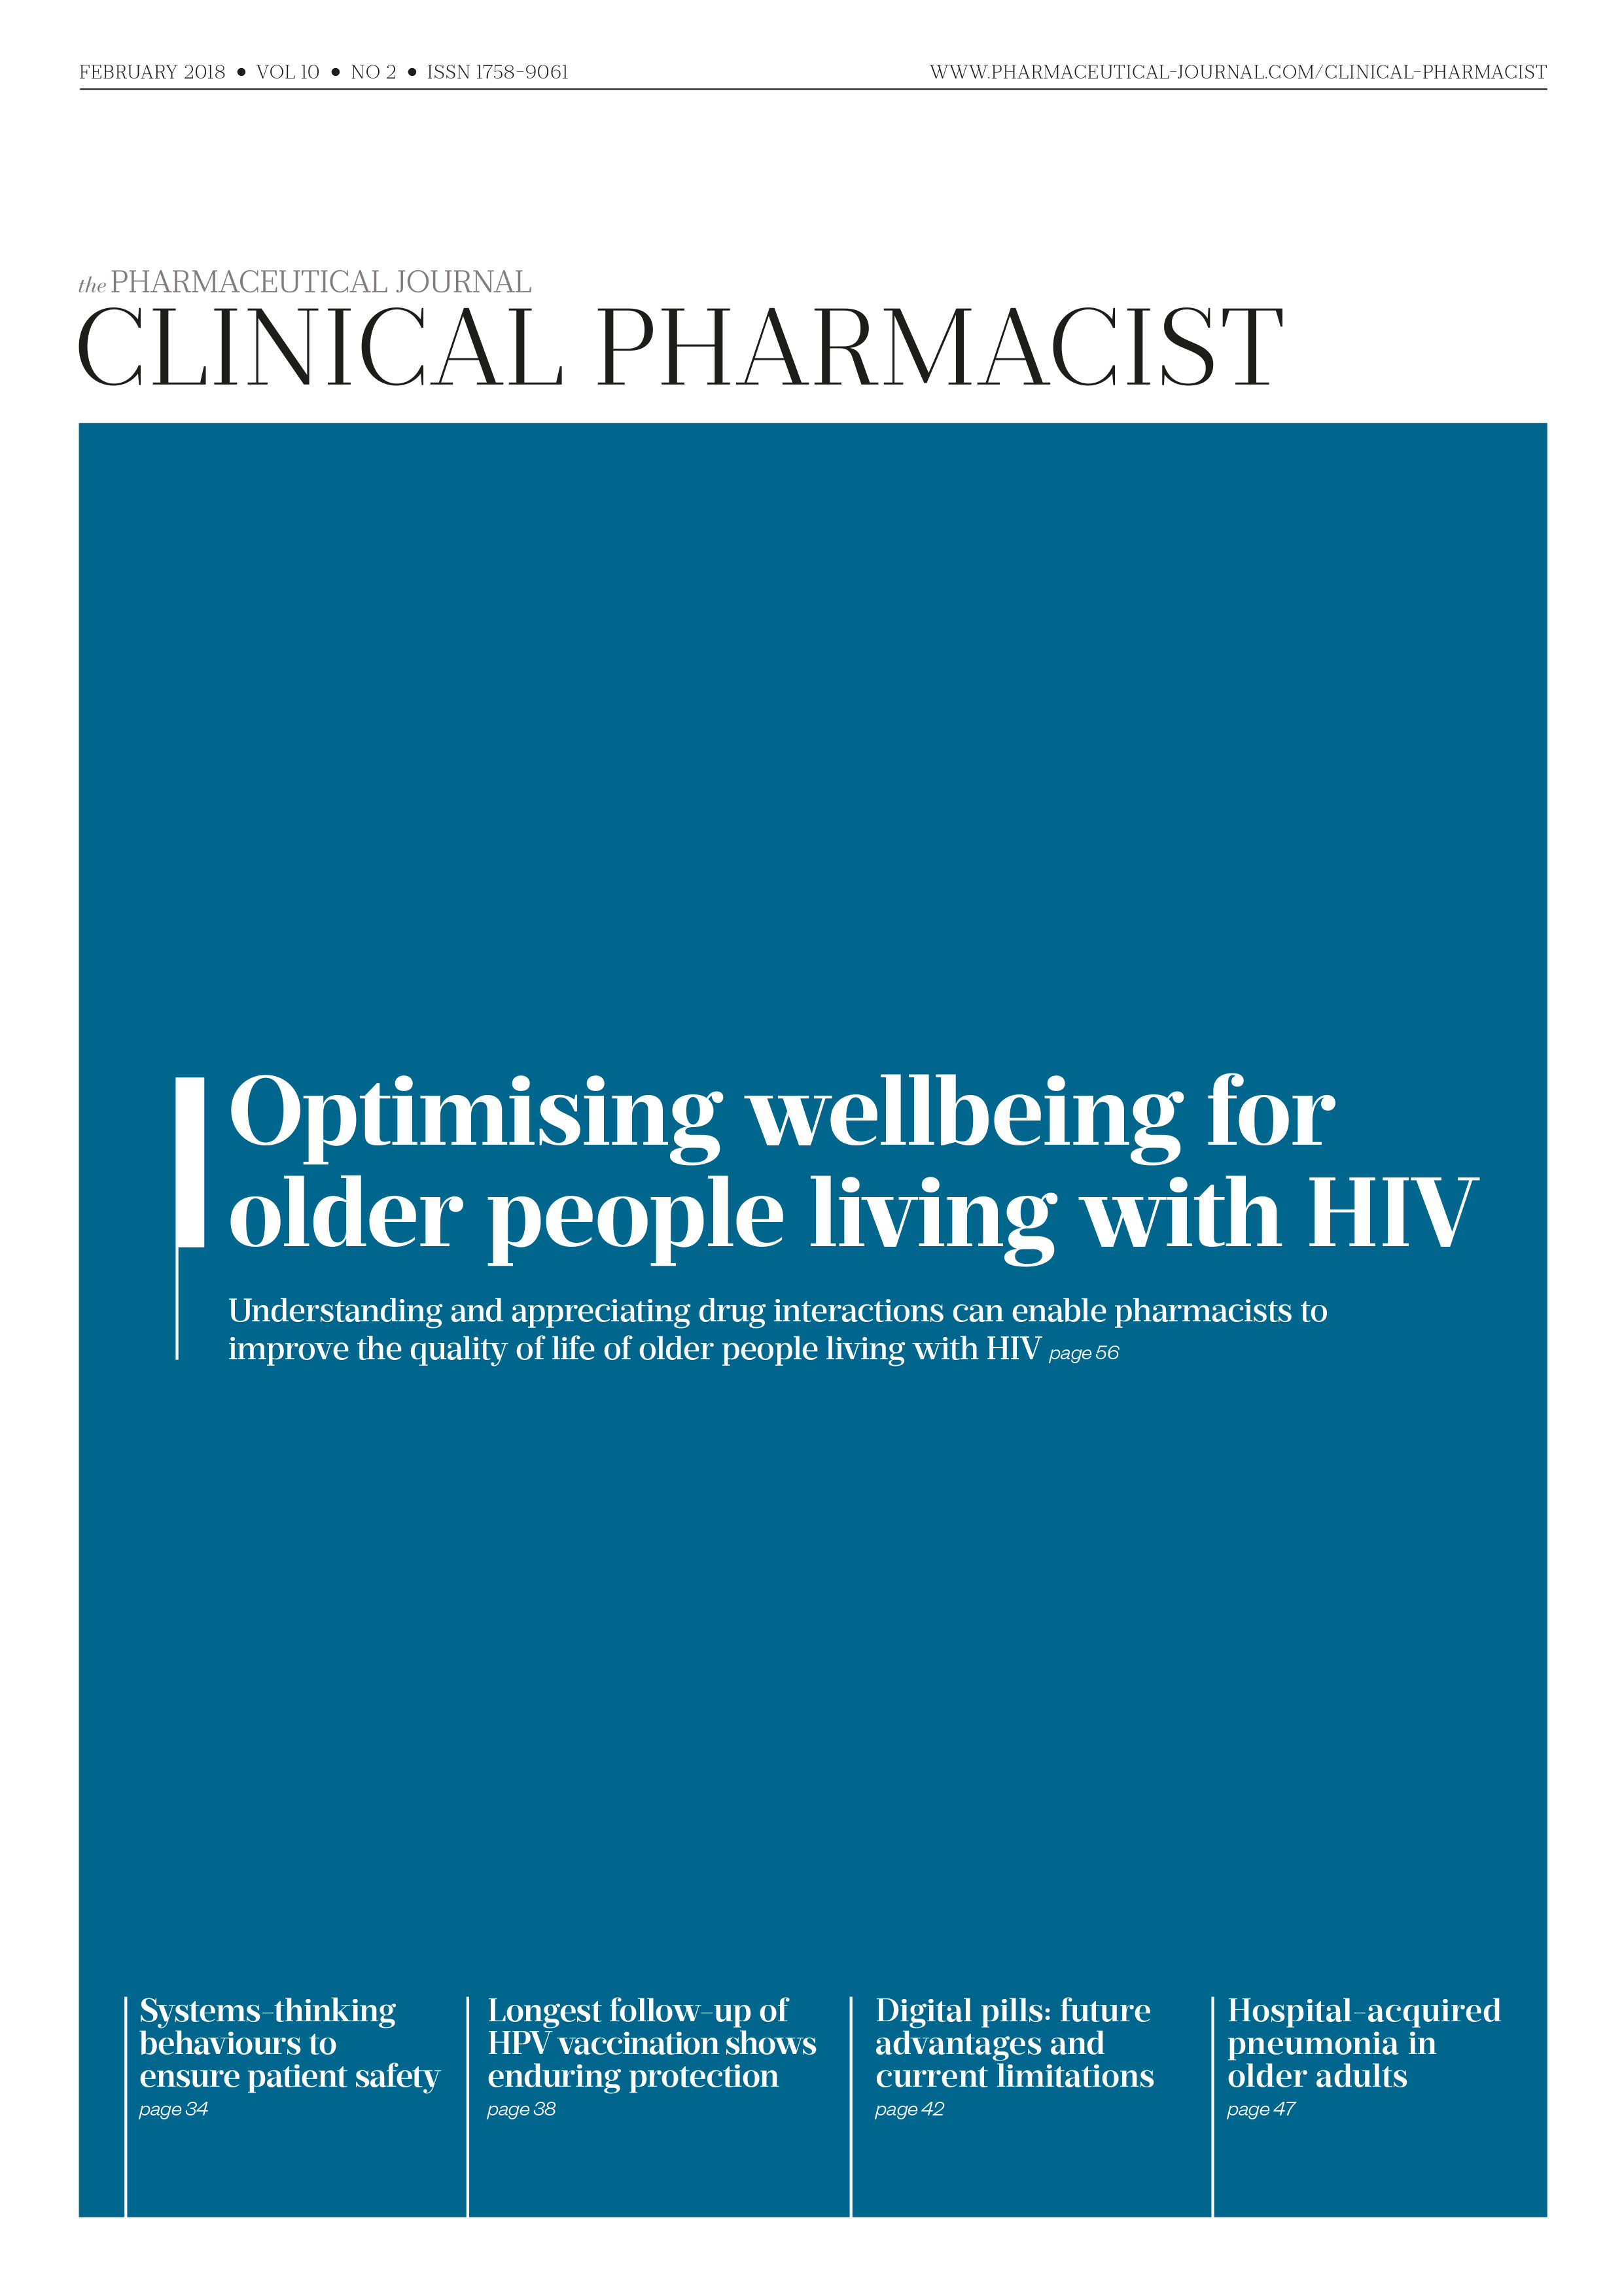 Publication issue cover for CP, February 2018, Vol 10, No 2